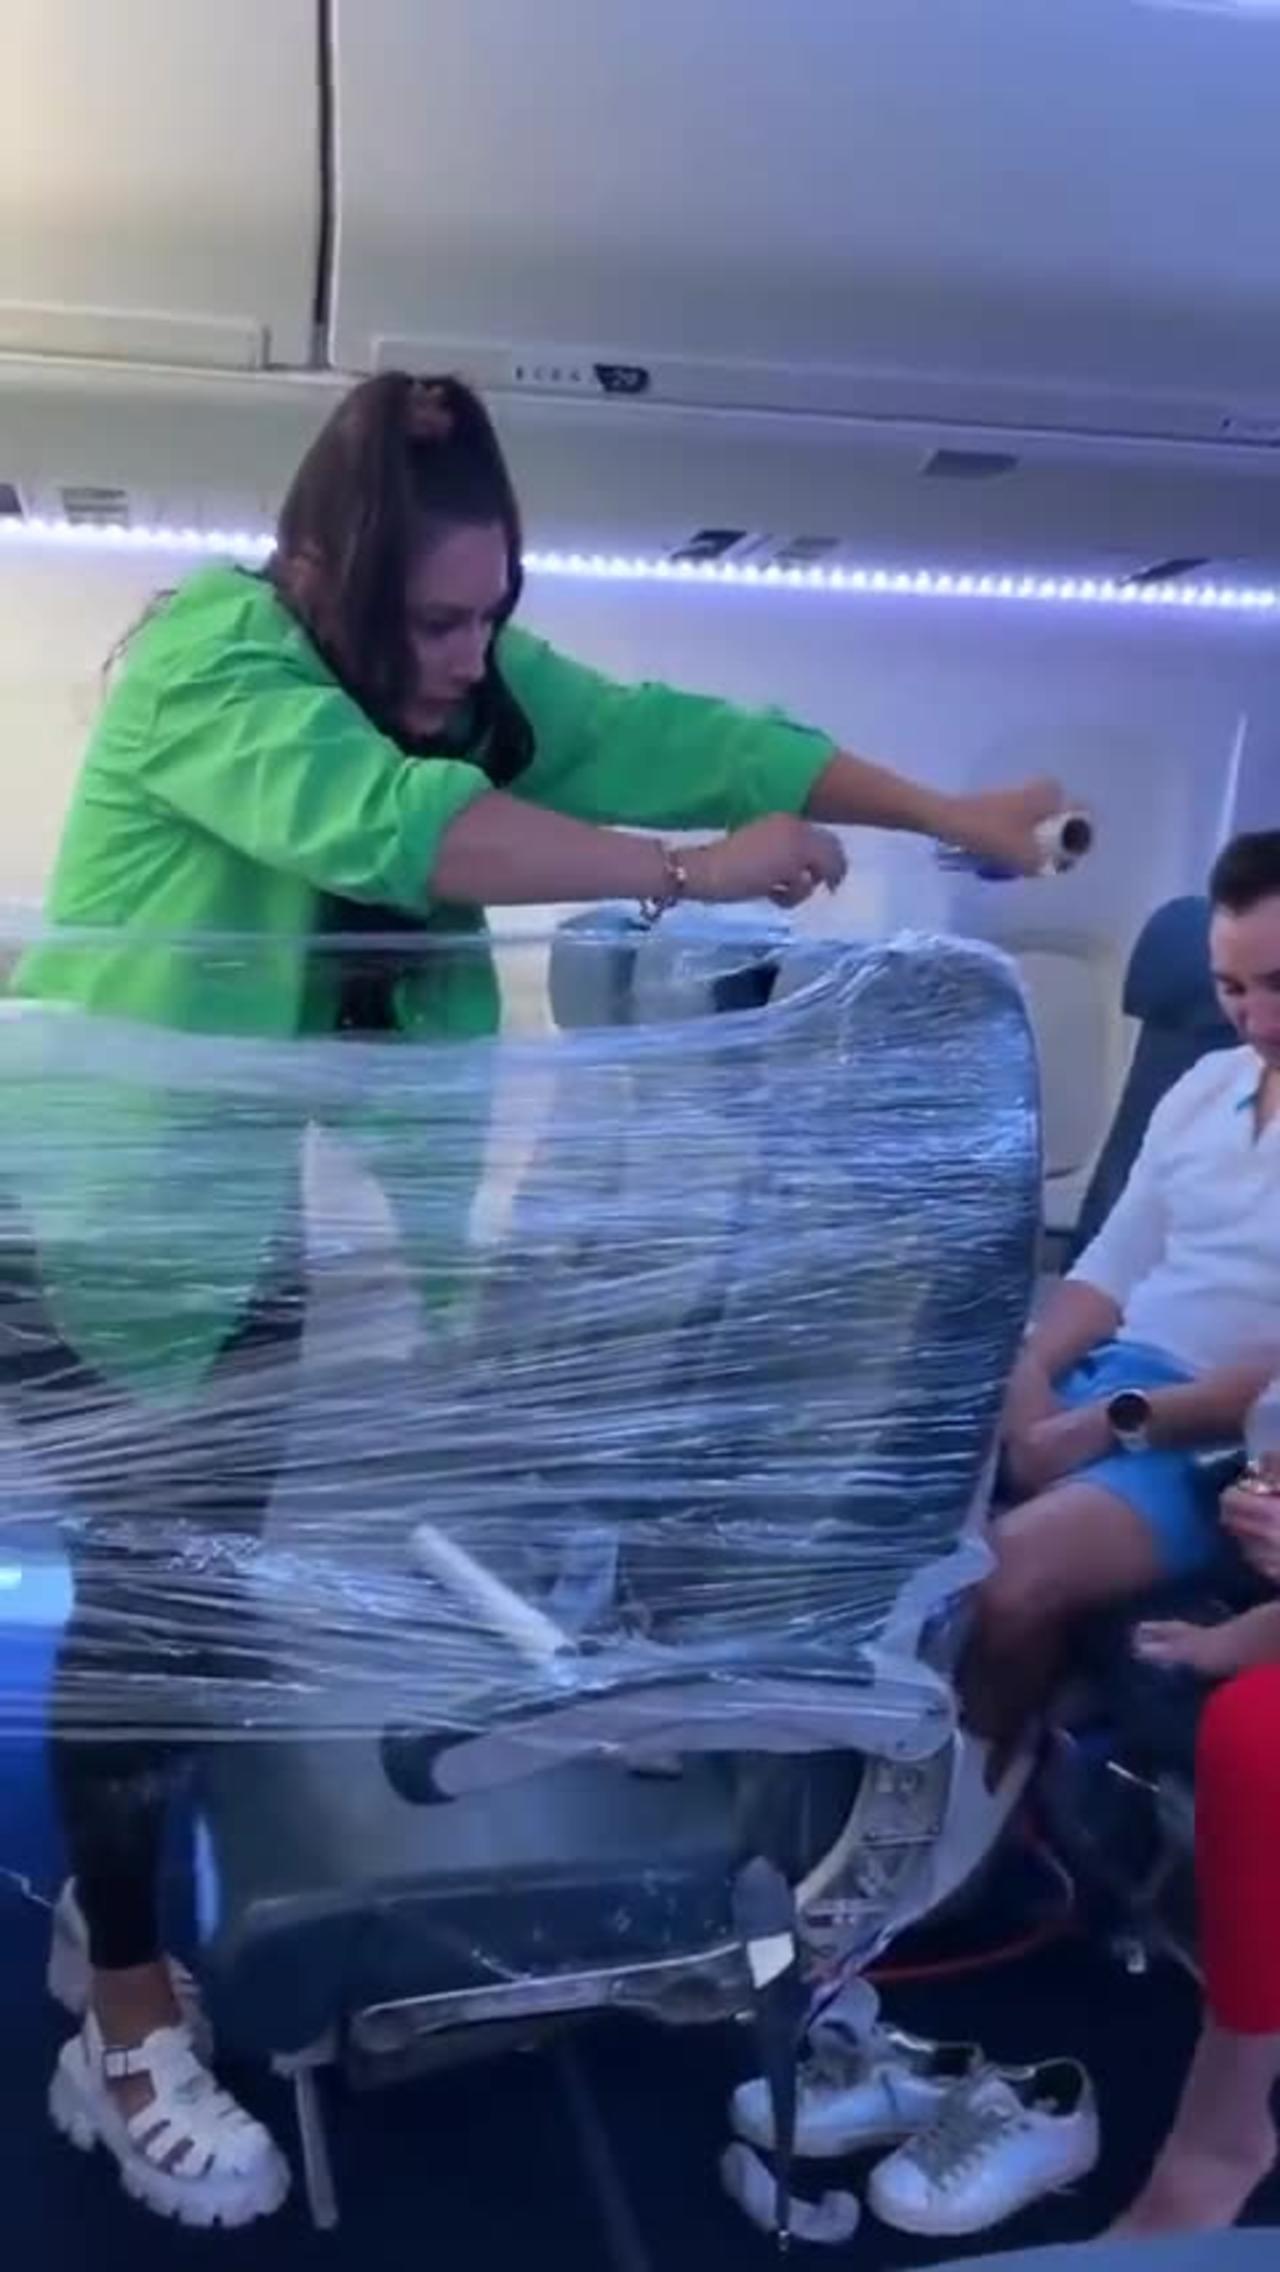 crazy woman makes clingfilm fort on plane